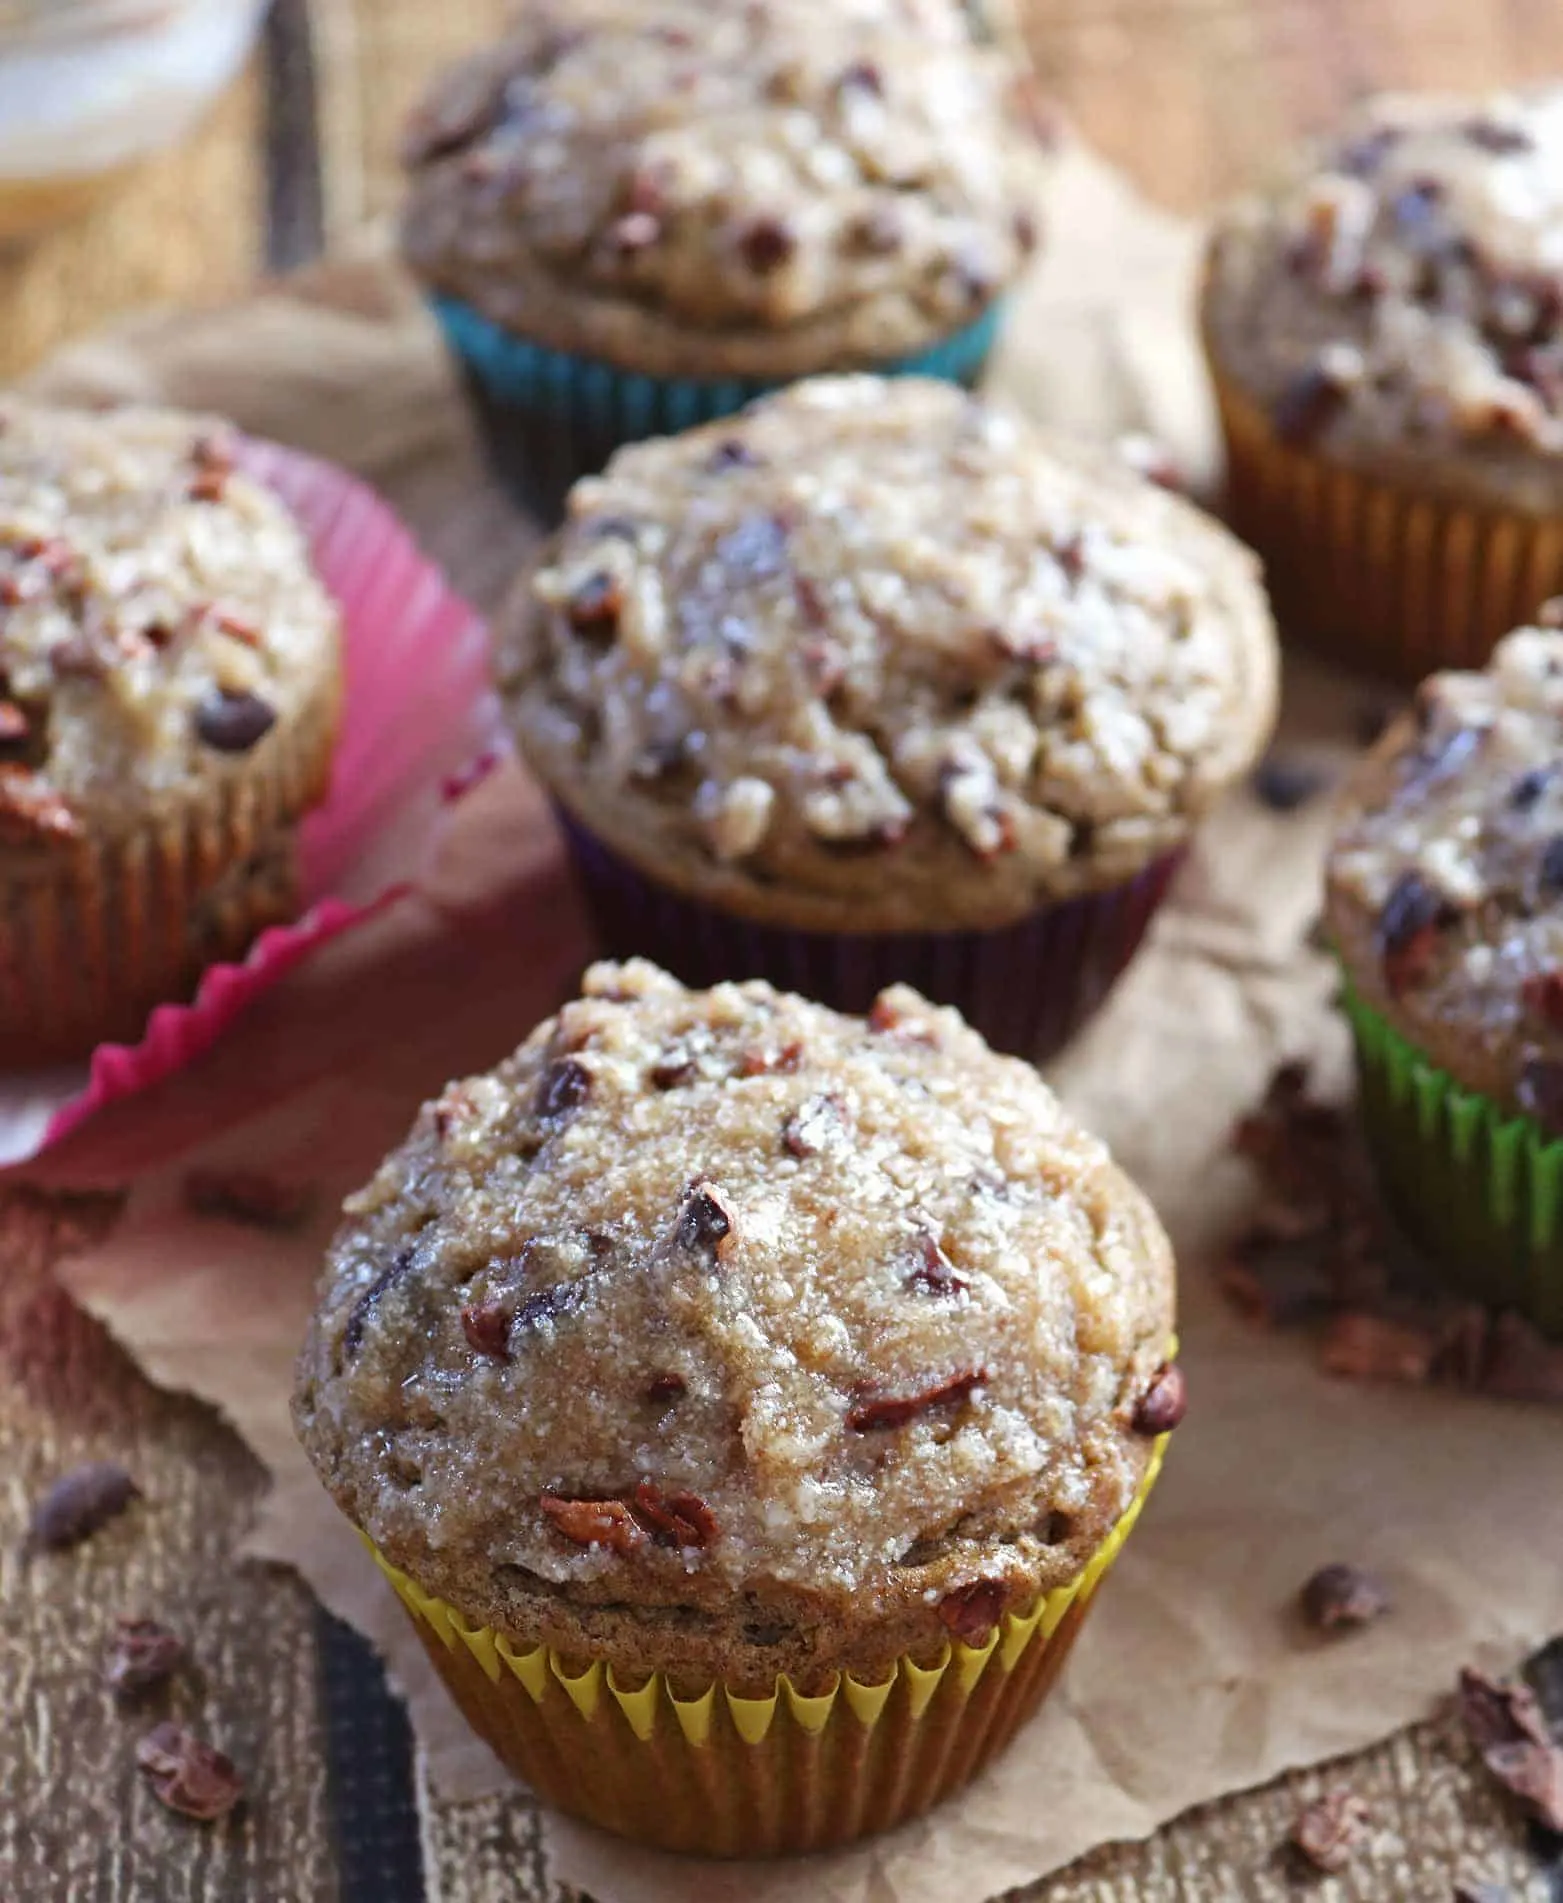 These Date Banana Muffins with Cacao Nibs are refined sugar-free, gluten-free and dairy-free AND taste-full!